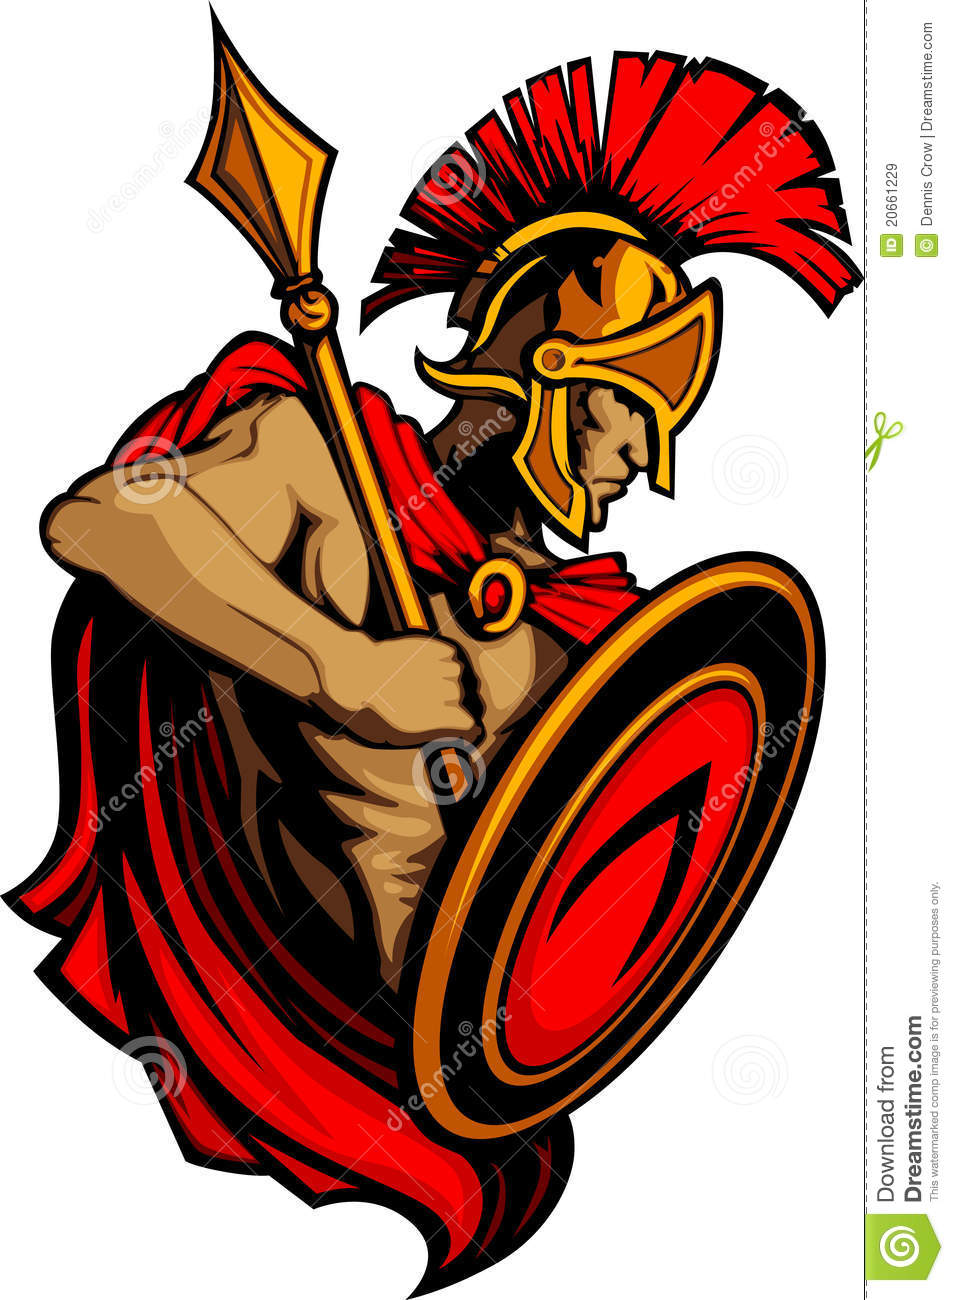 Sparta clipart #15, Download drawings